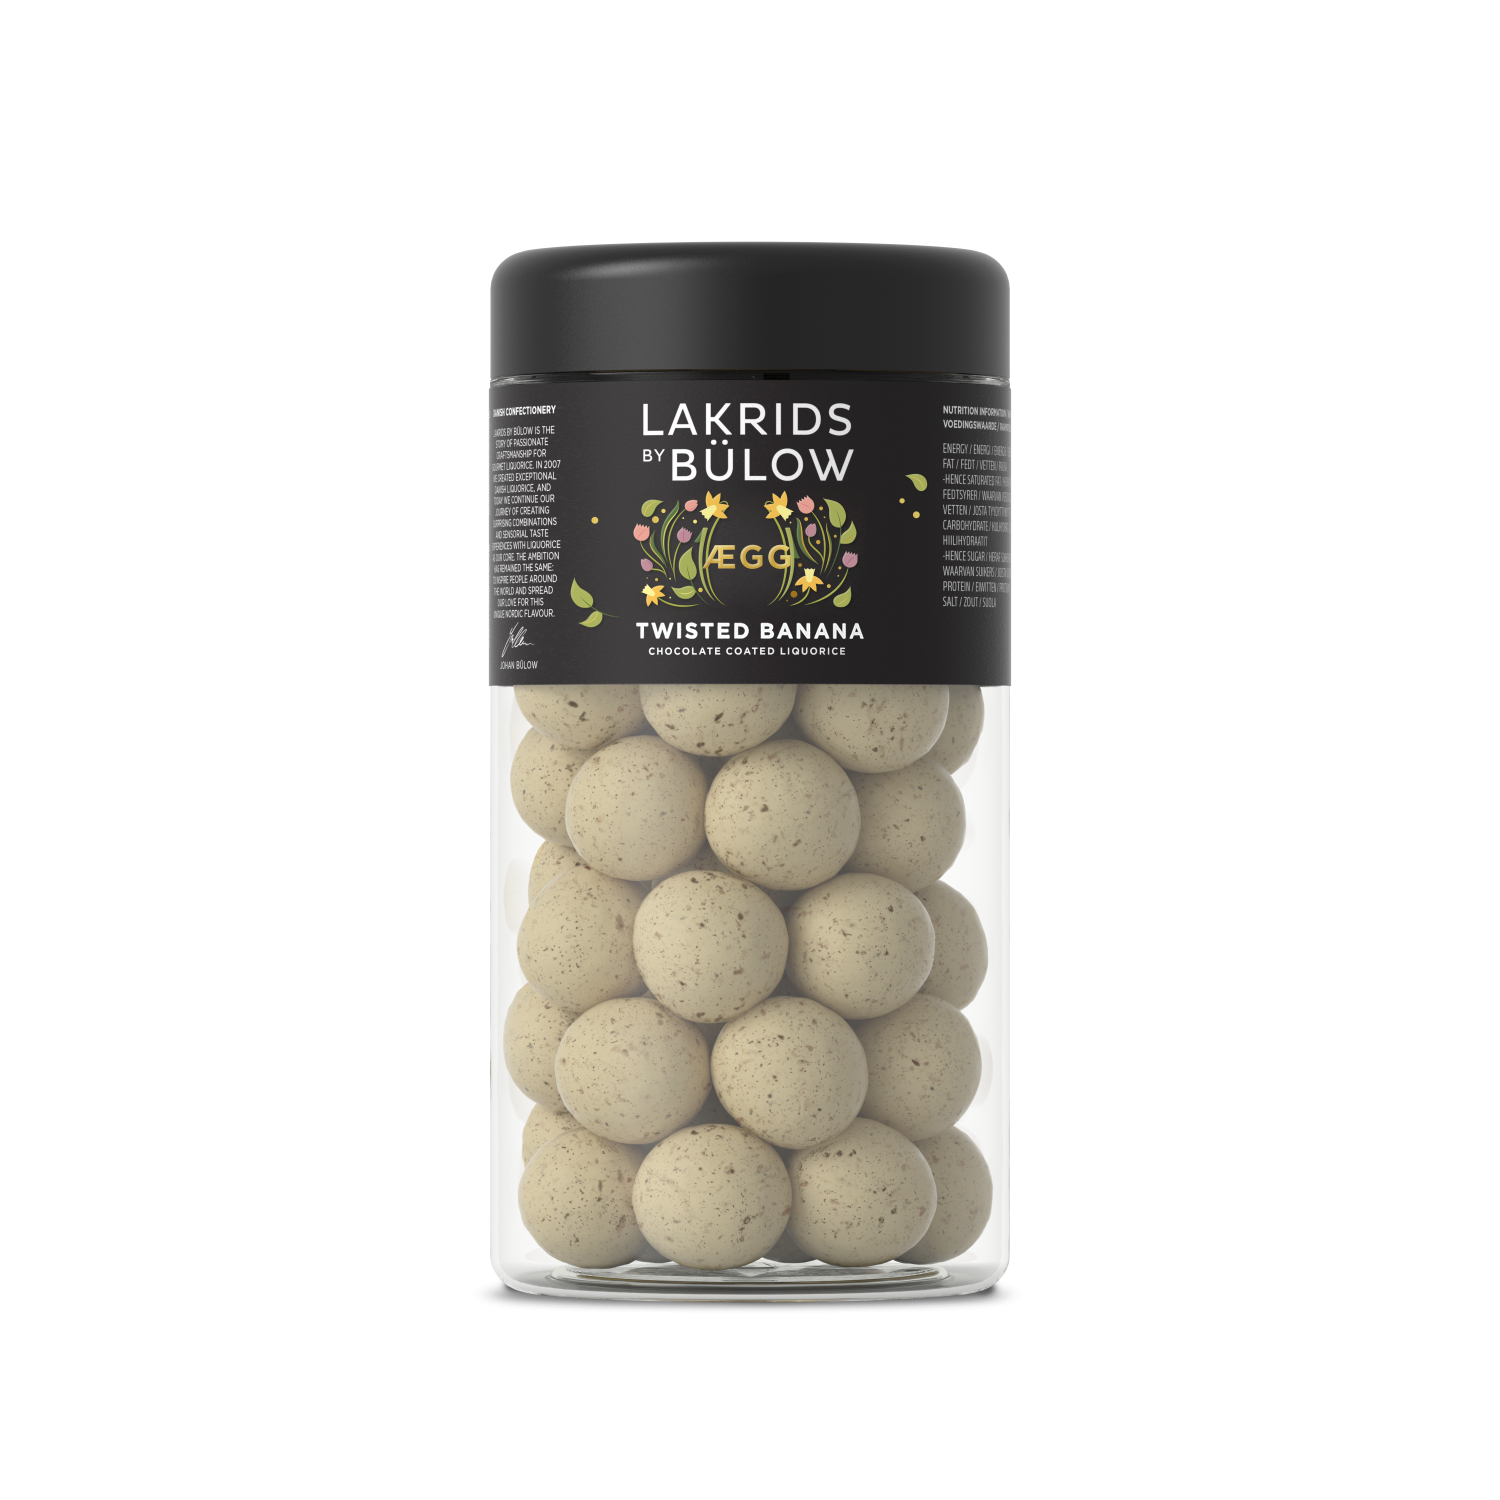 Lakrids by Bylow twisted banana large